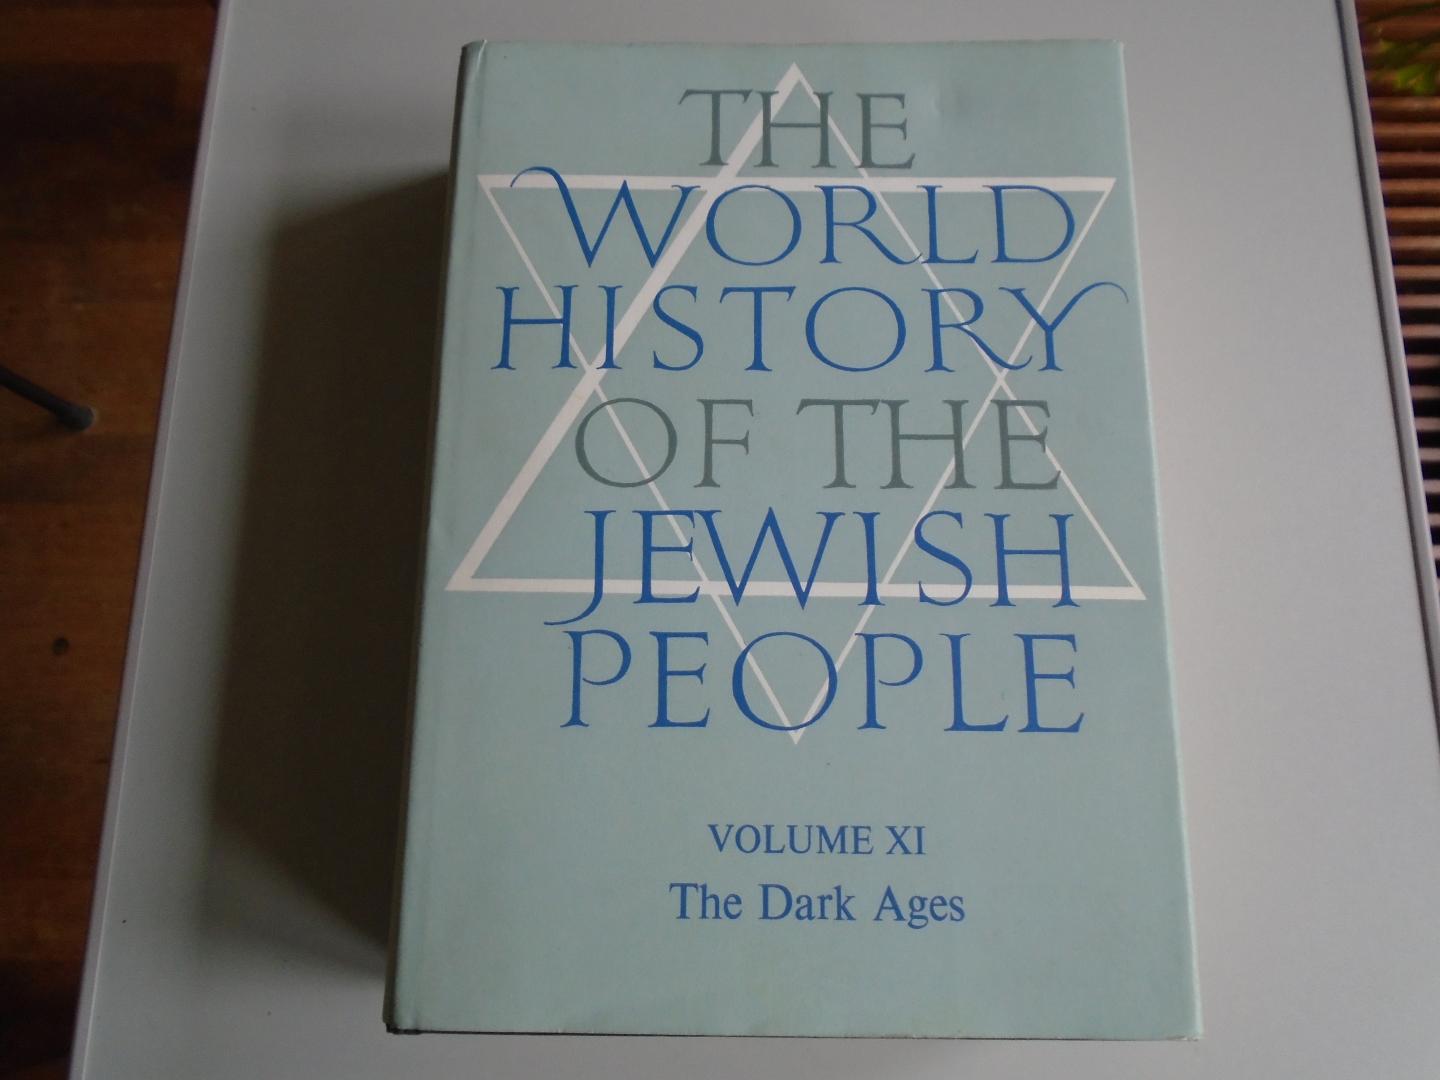 Roth, Cecil (ed.) - The World History of the Jewish People. Volume XI: The Dark Ages